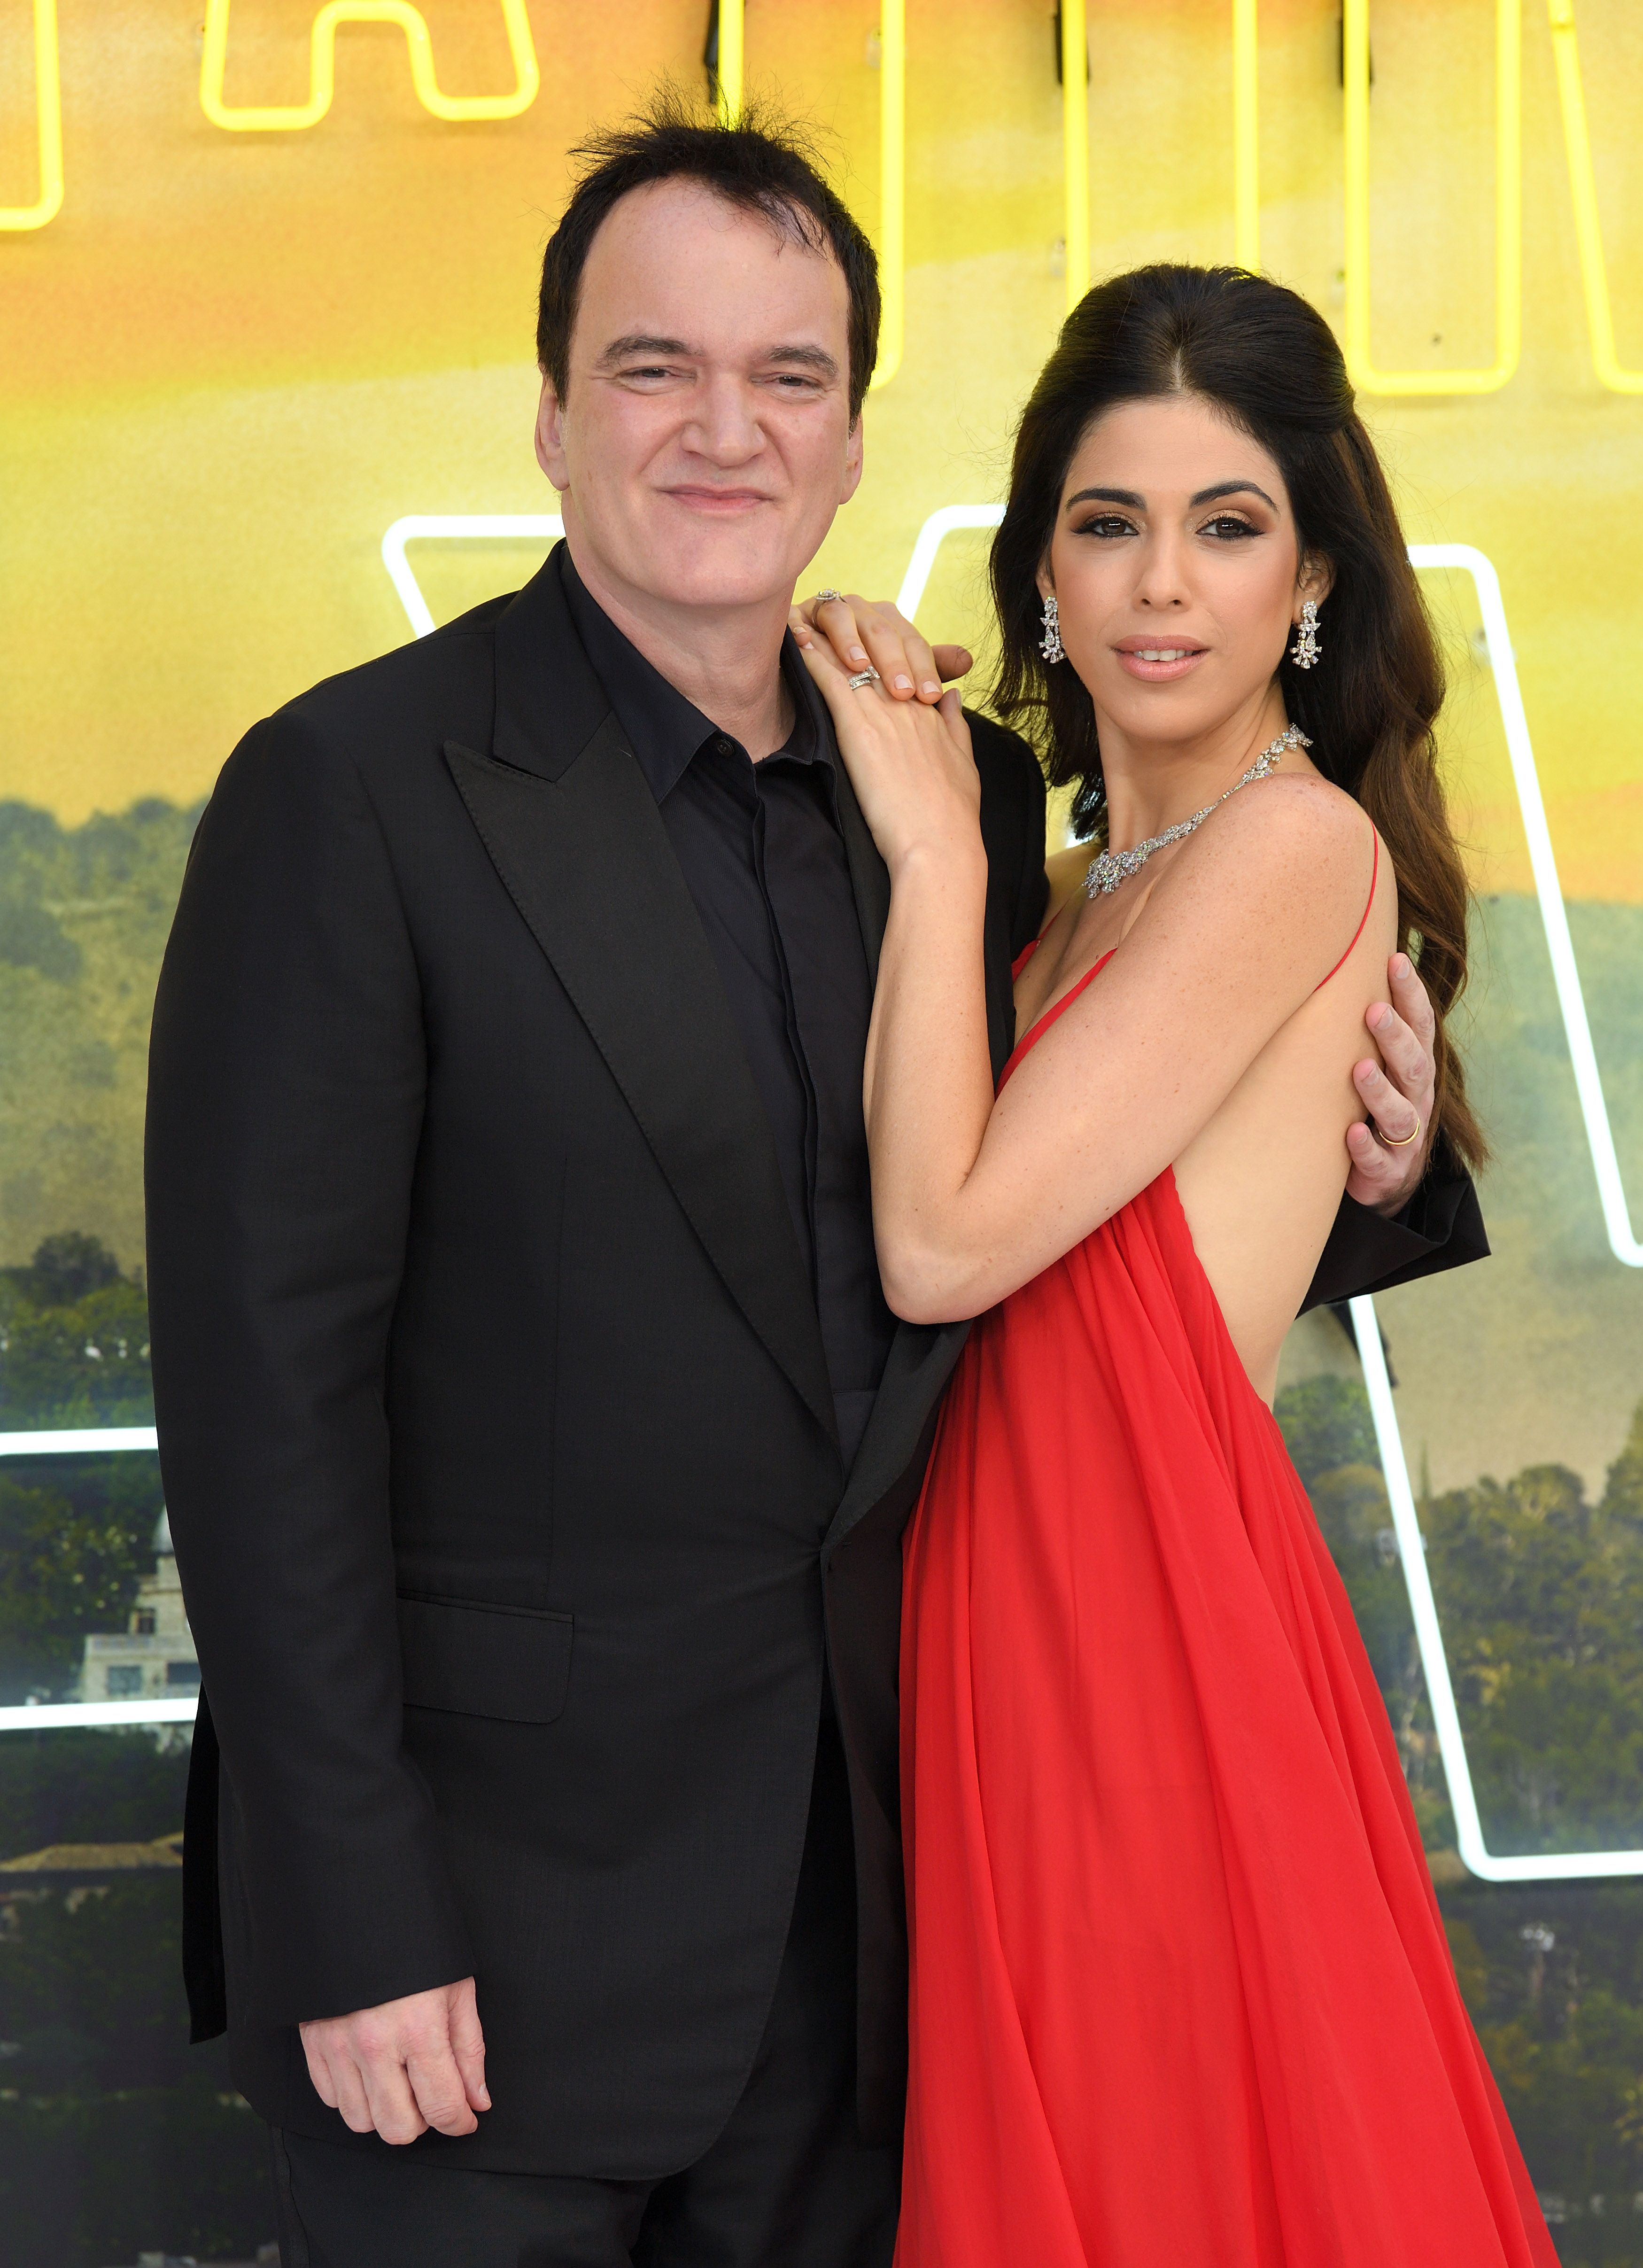 Quentin Tarantino and Daniella Pick at the "Once Upon a Time... in Hollywood" UK premiere in 2019 in London, England | Source: Getty Images